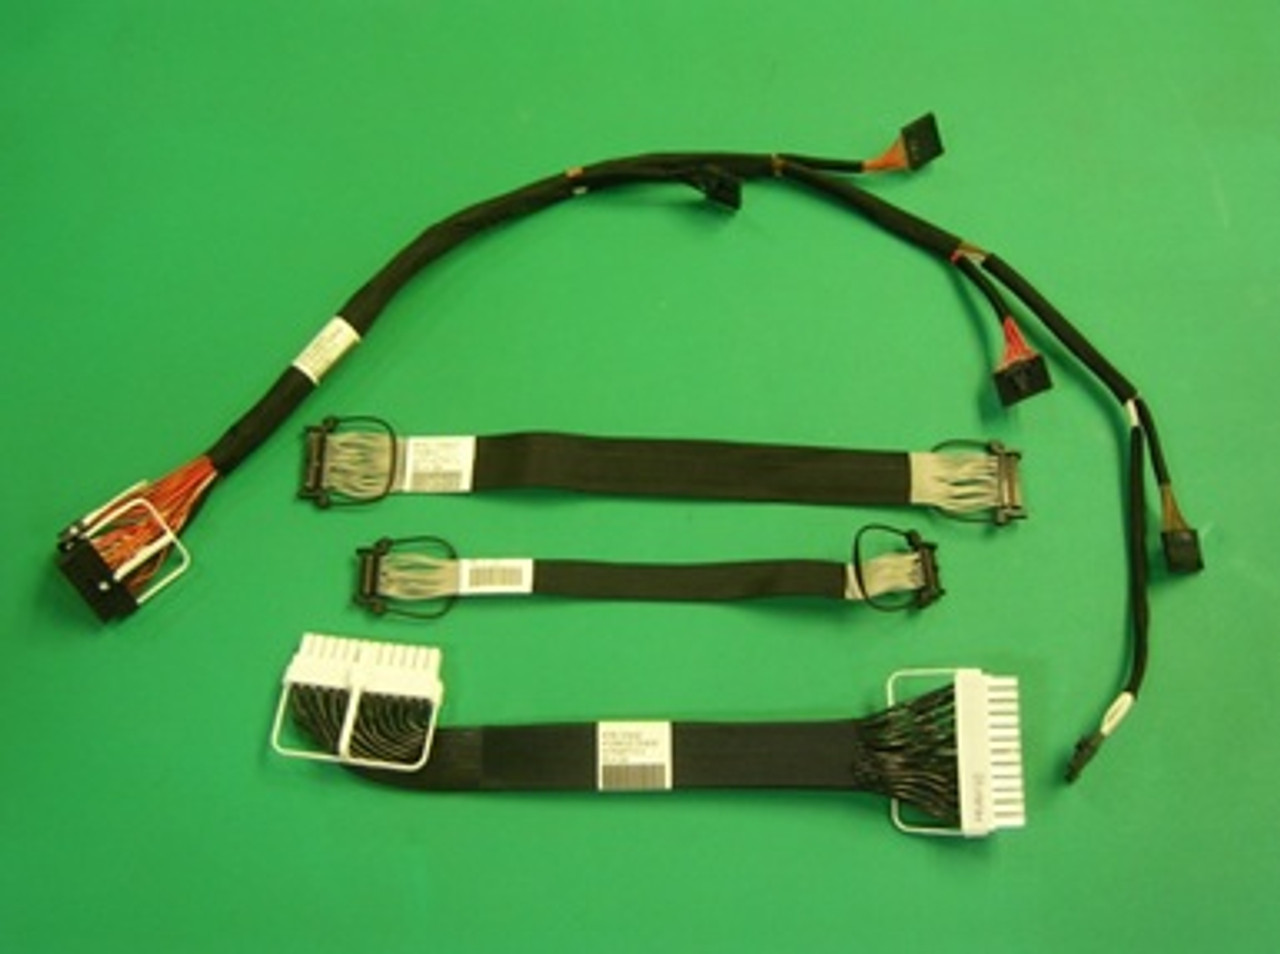 SPS-MISC CABLE KIT - 735185-001